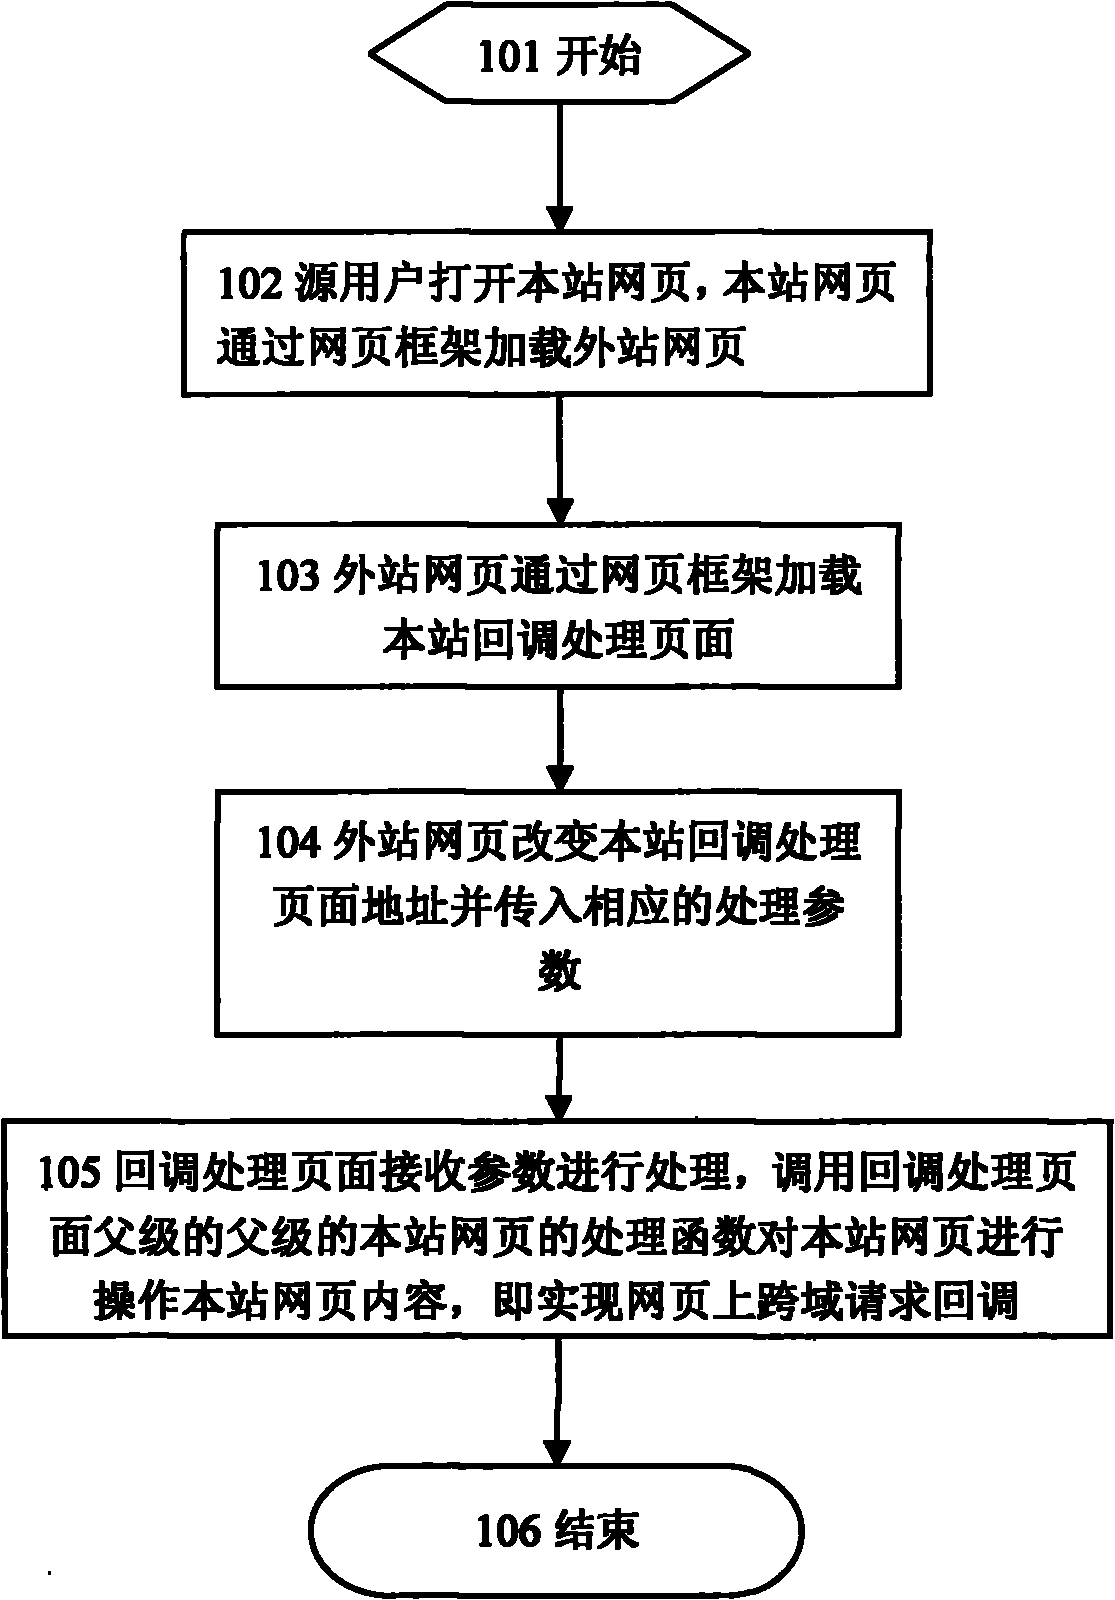 Method for implementing cross-domain request callback